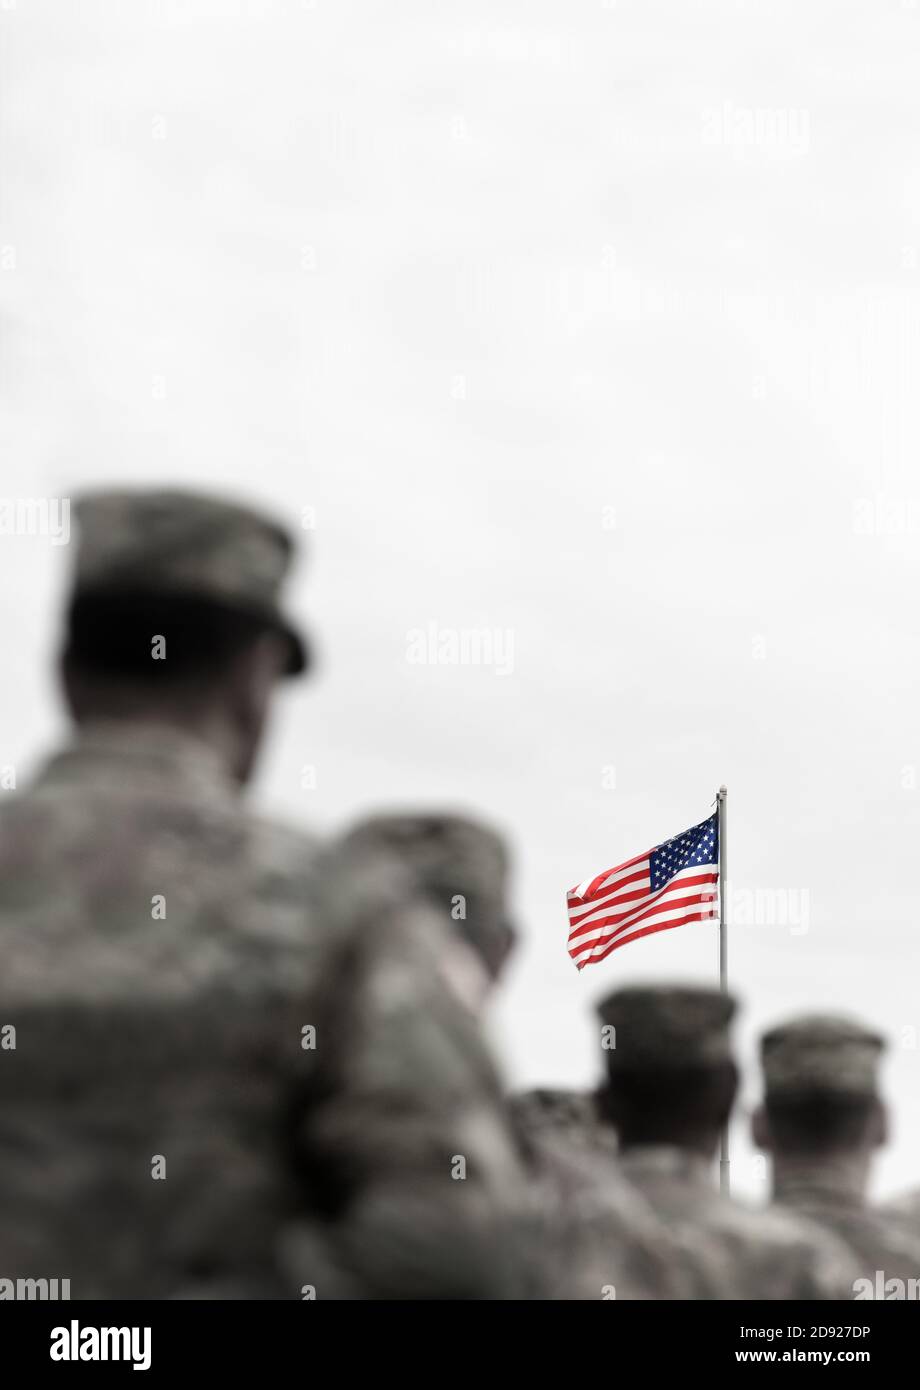 Veterans Day. US soldier. US Army. The United States Armed Forces. Military forces of the United States of America. Empty space for text Stock Photo